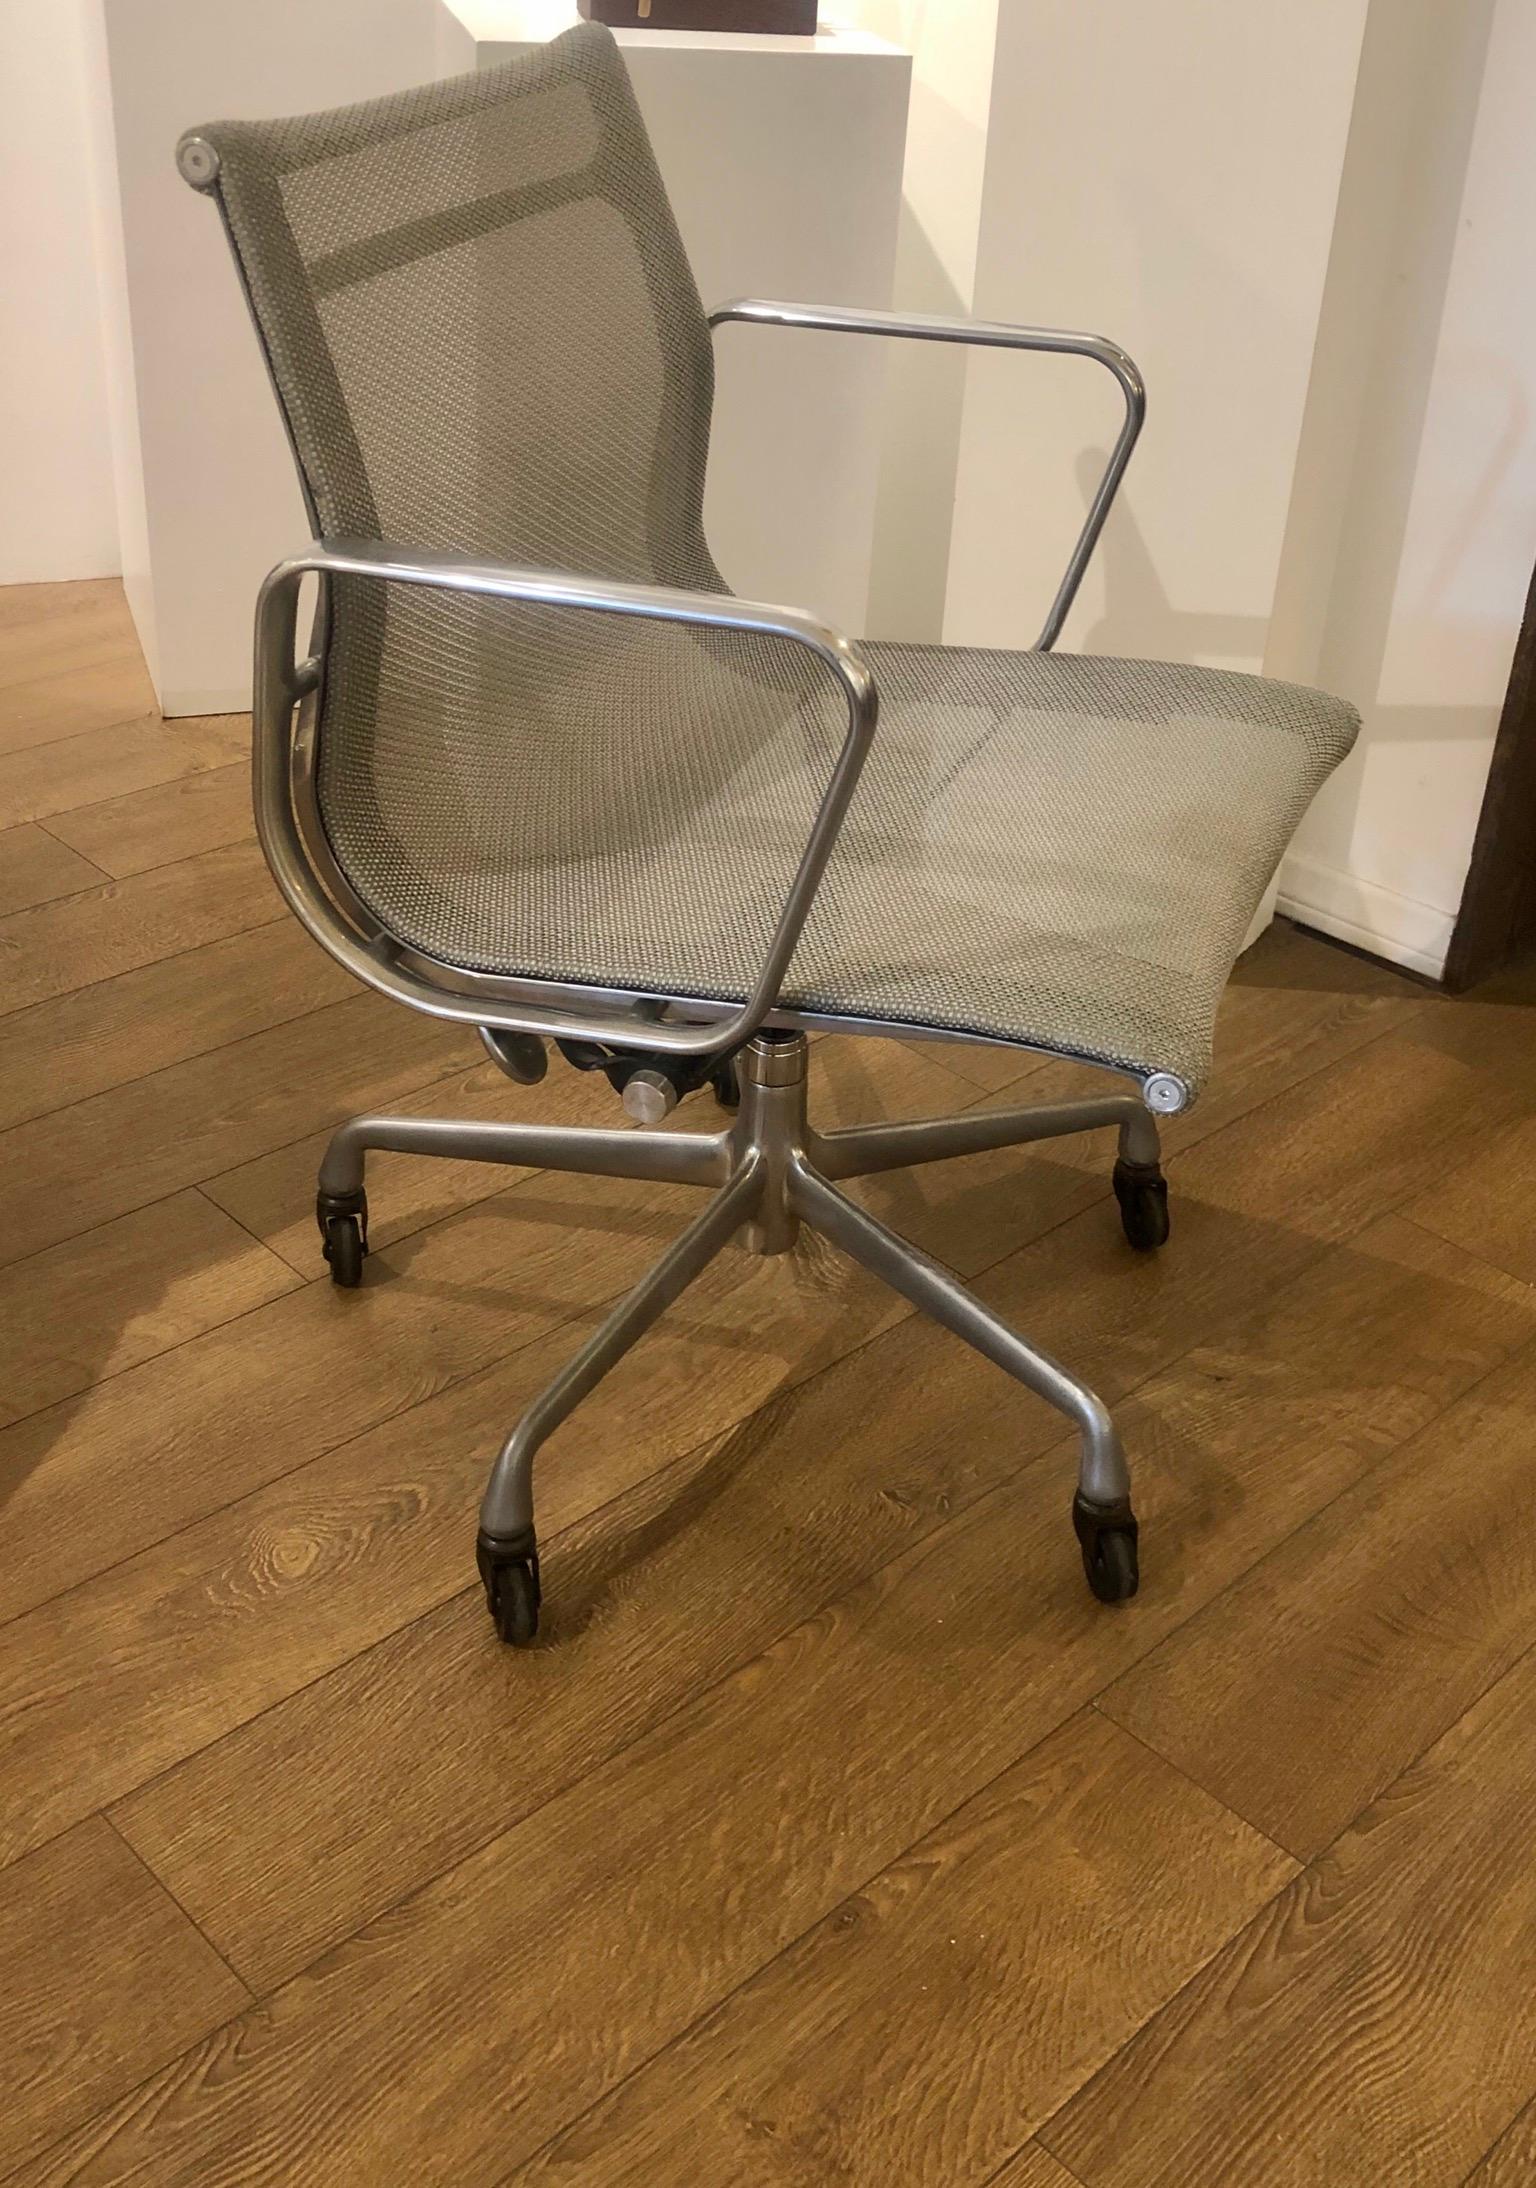 Eames Herman Miller Aluminum Group chair on casters 50 year anniversary, nice gray mesh made in 2008 with original tag as shown nice clean condition light worn. The seat can go up and down a couple of inches.